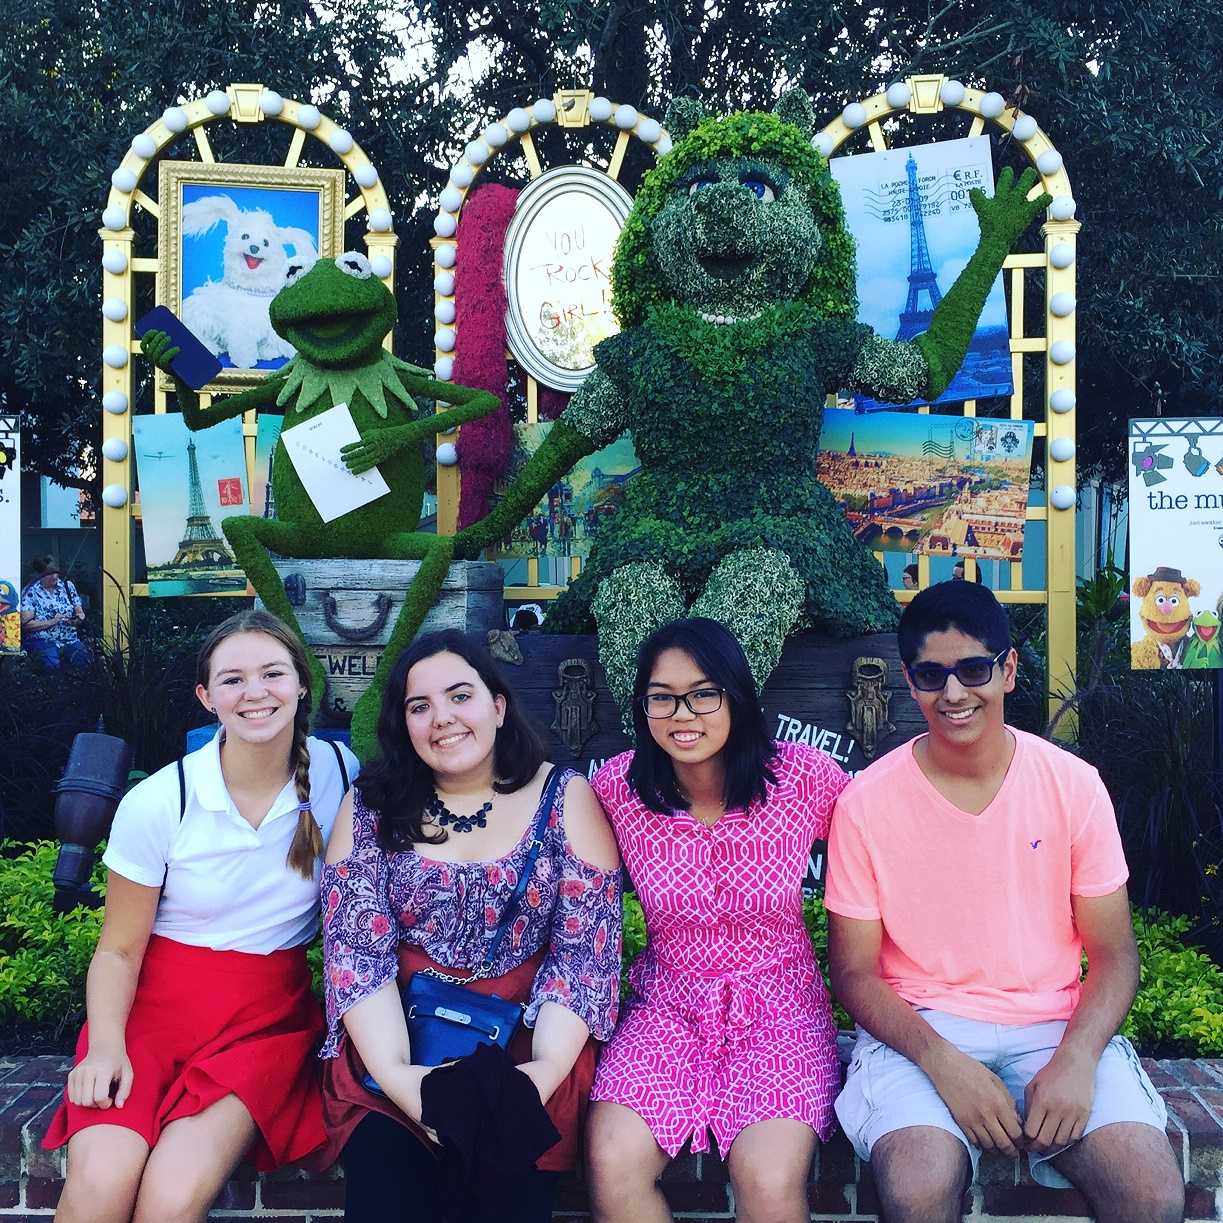 A PICK WITH "MOI": You can expect different photo ops throughout the shopping area. Here, we managed to snag a pick with Kermit the Frog and Miss Piggy. From left: Emma Edmund '18, Dina Al-Hassani '16, Samantha Tun '17 and Arjun Gandhi '18.